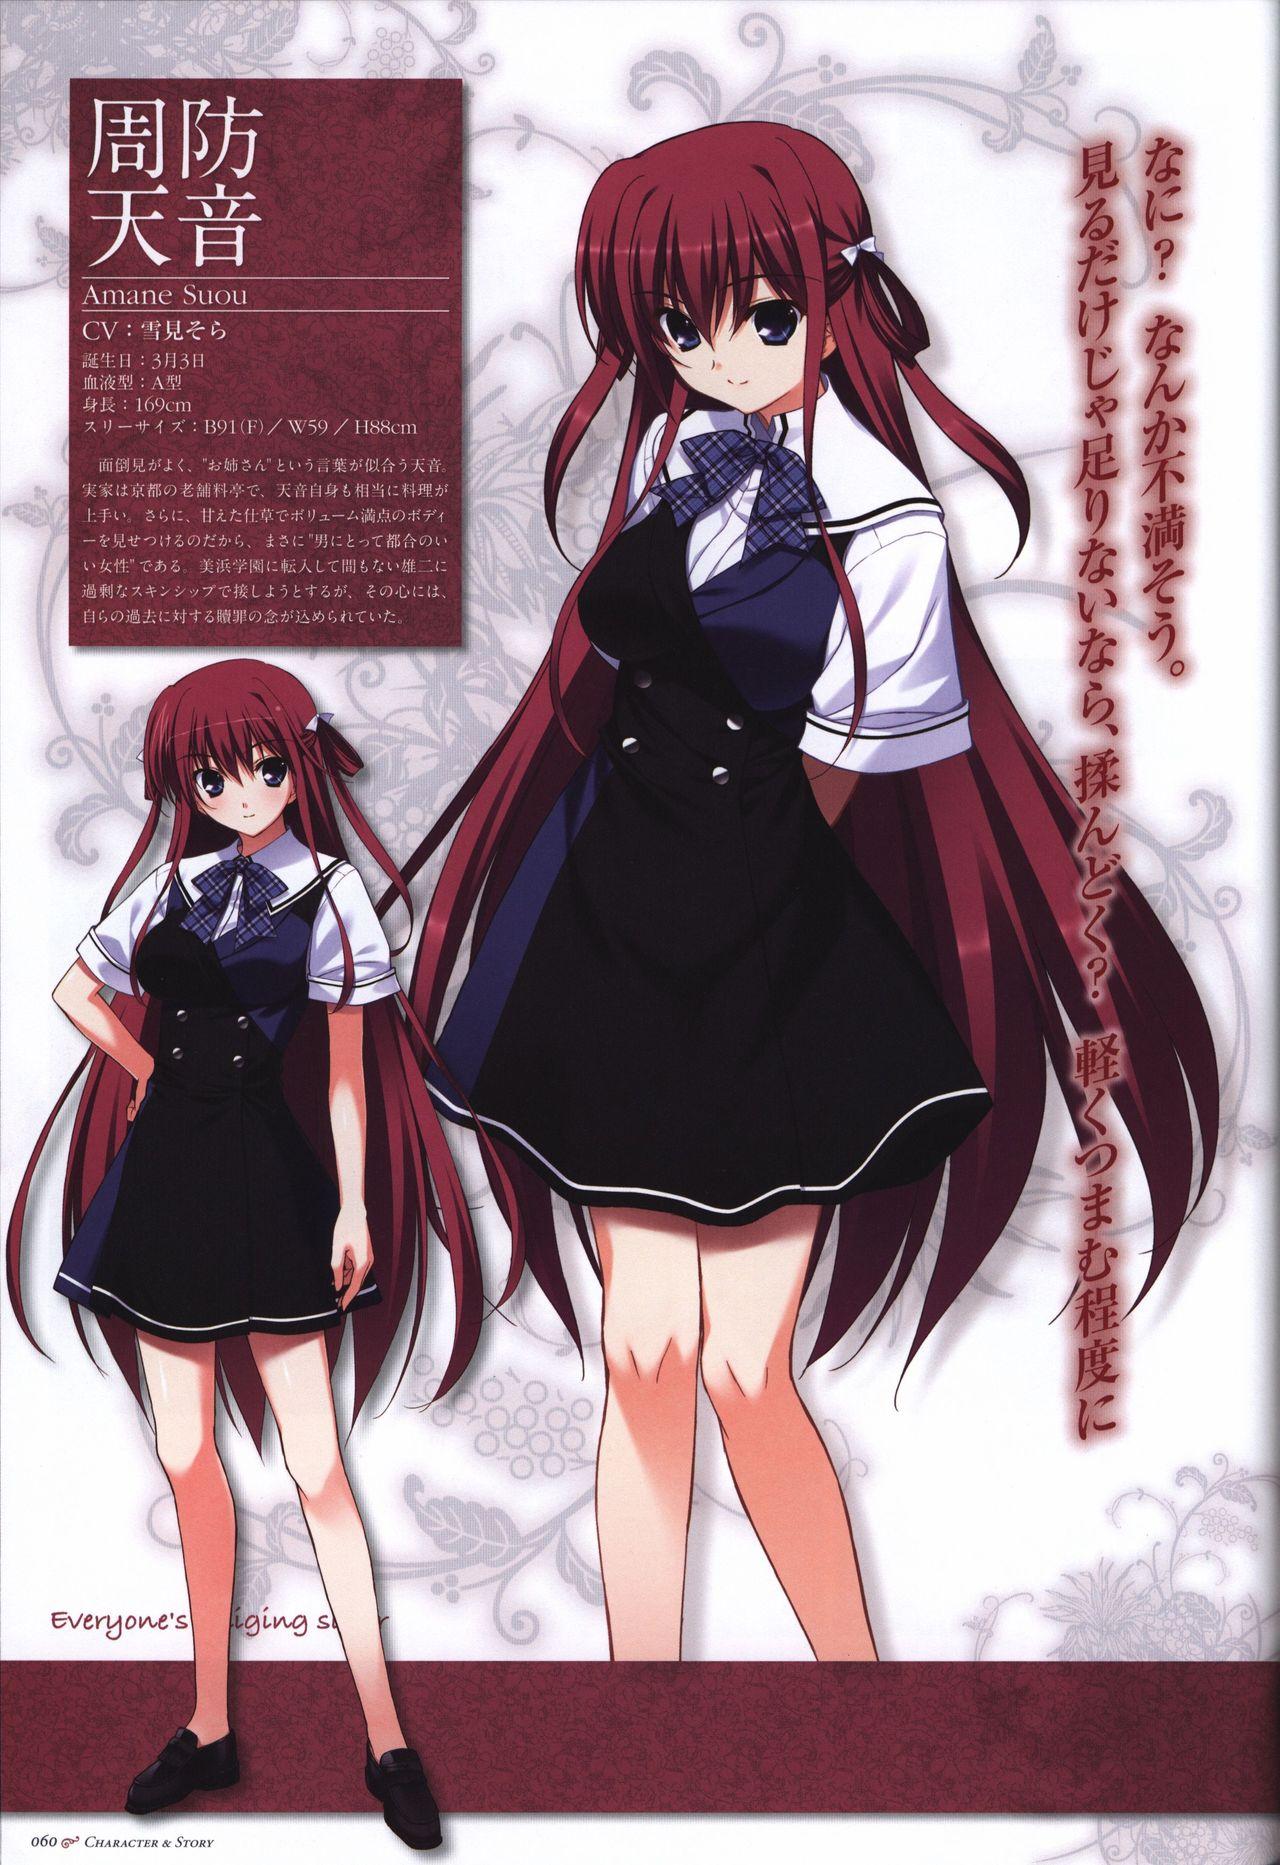 The Fruit of Grisaia Visual FanBook 60